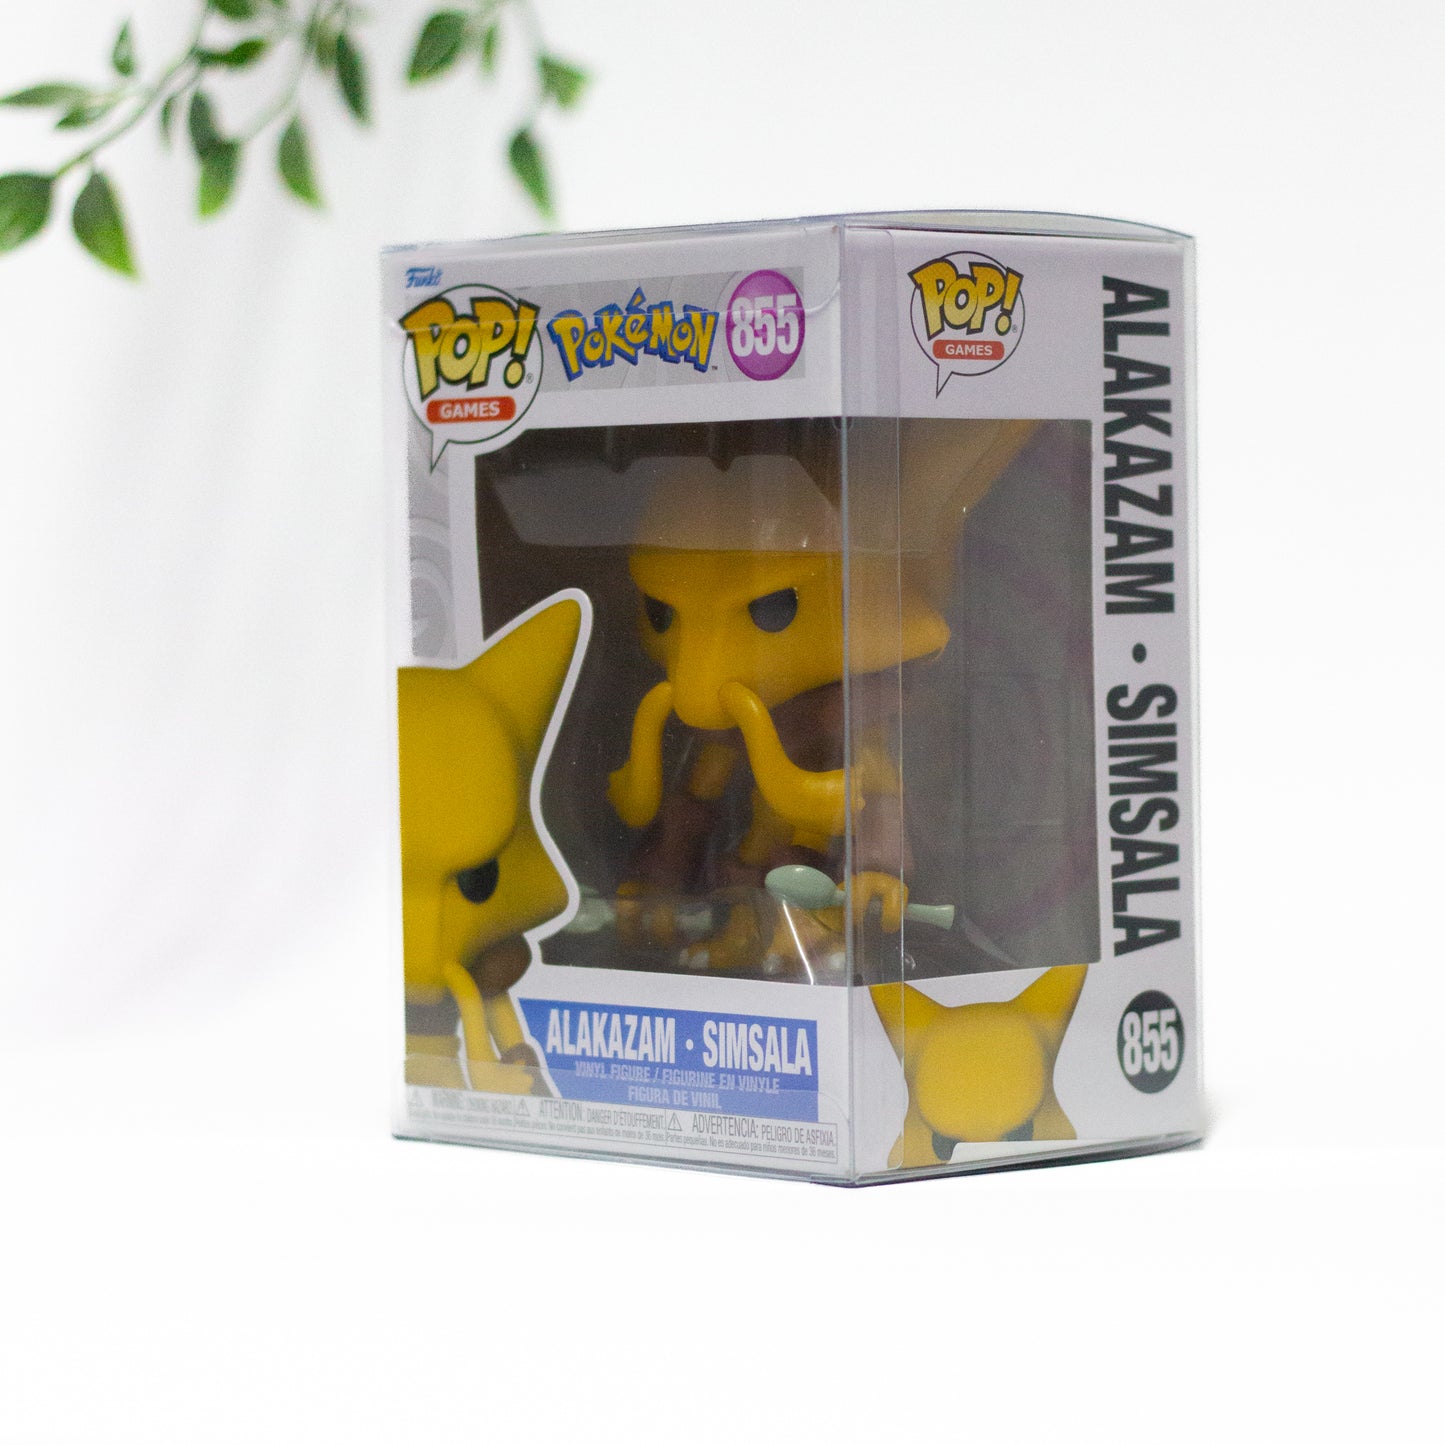 Funko Pop Protector (5-pack)